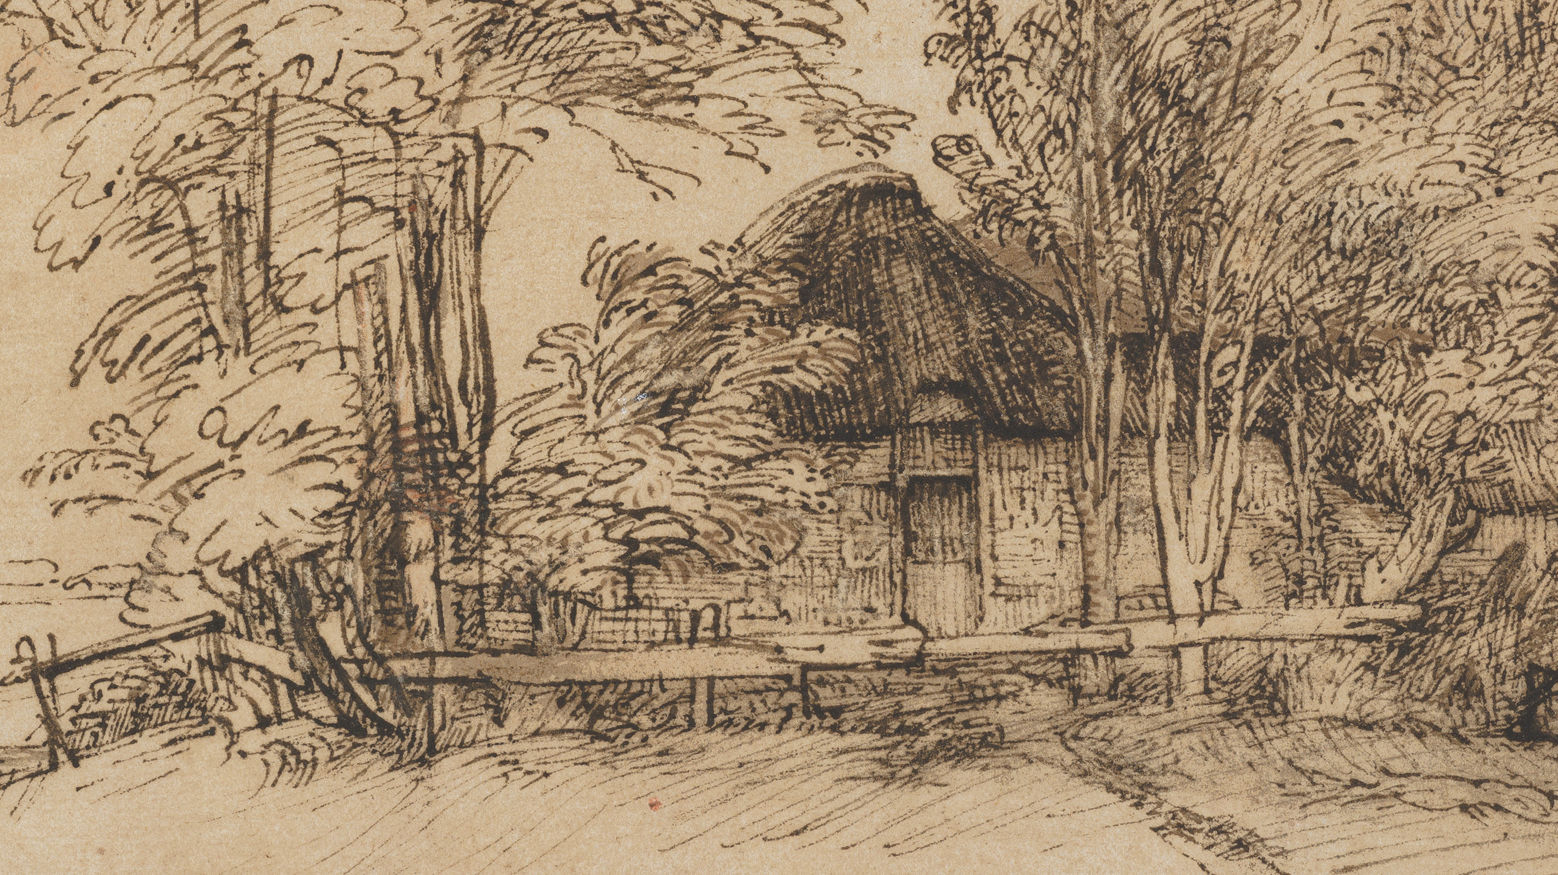 A frenetic, detailed line drawing of a thatched-roof cottage surrounded by trees and farmland.